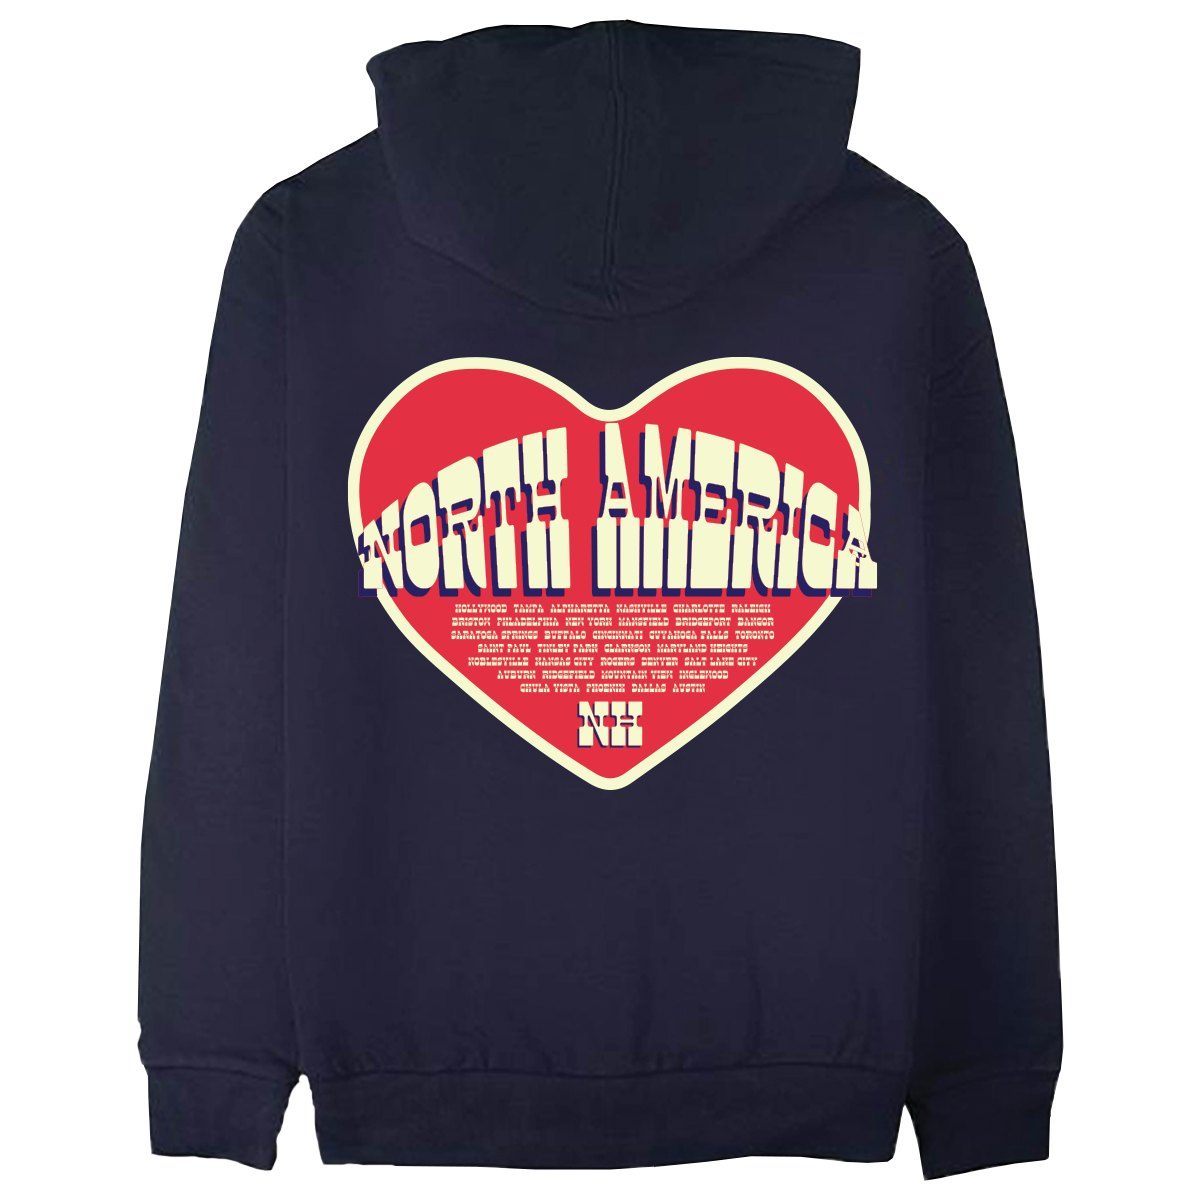 THE SHOW LIVE ON TOUR NAVY ZIP HOODIE